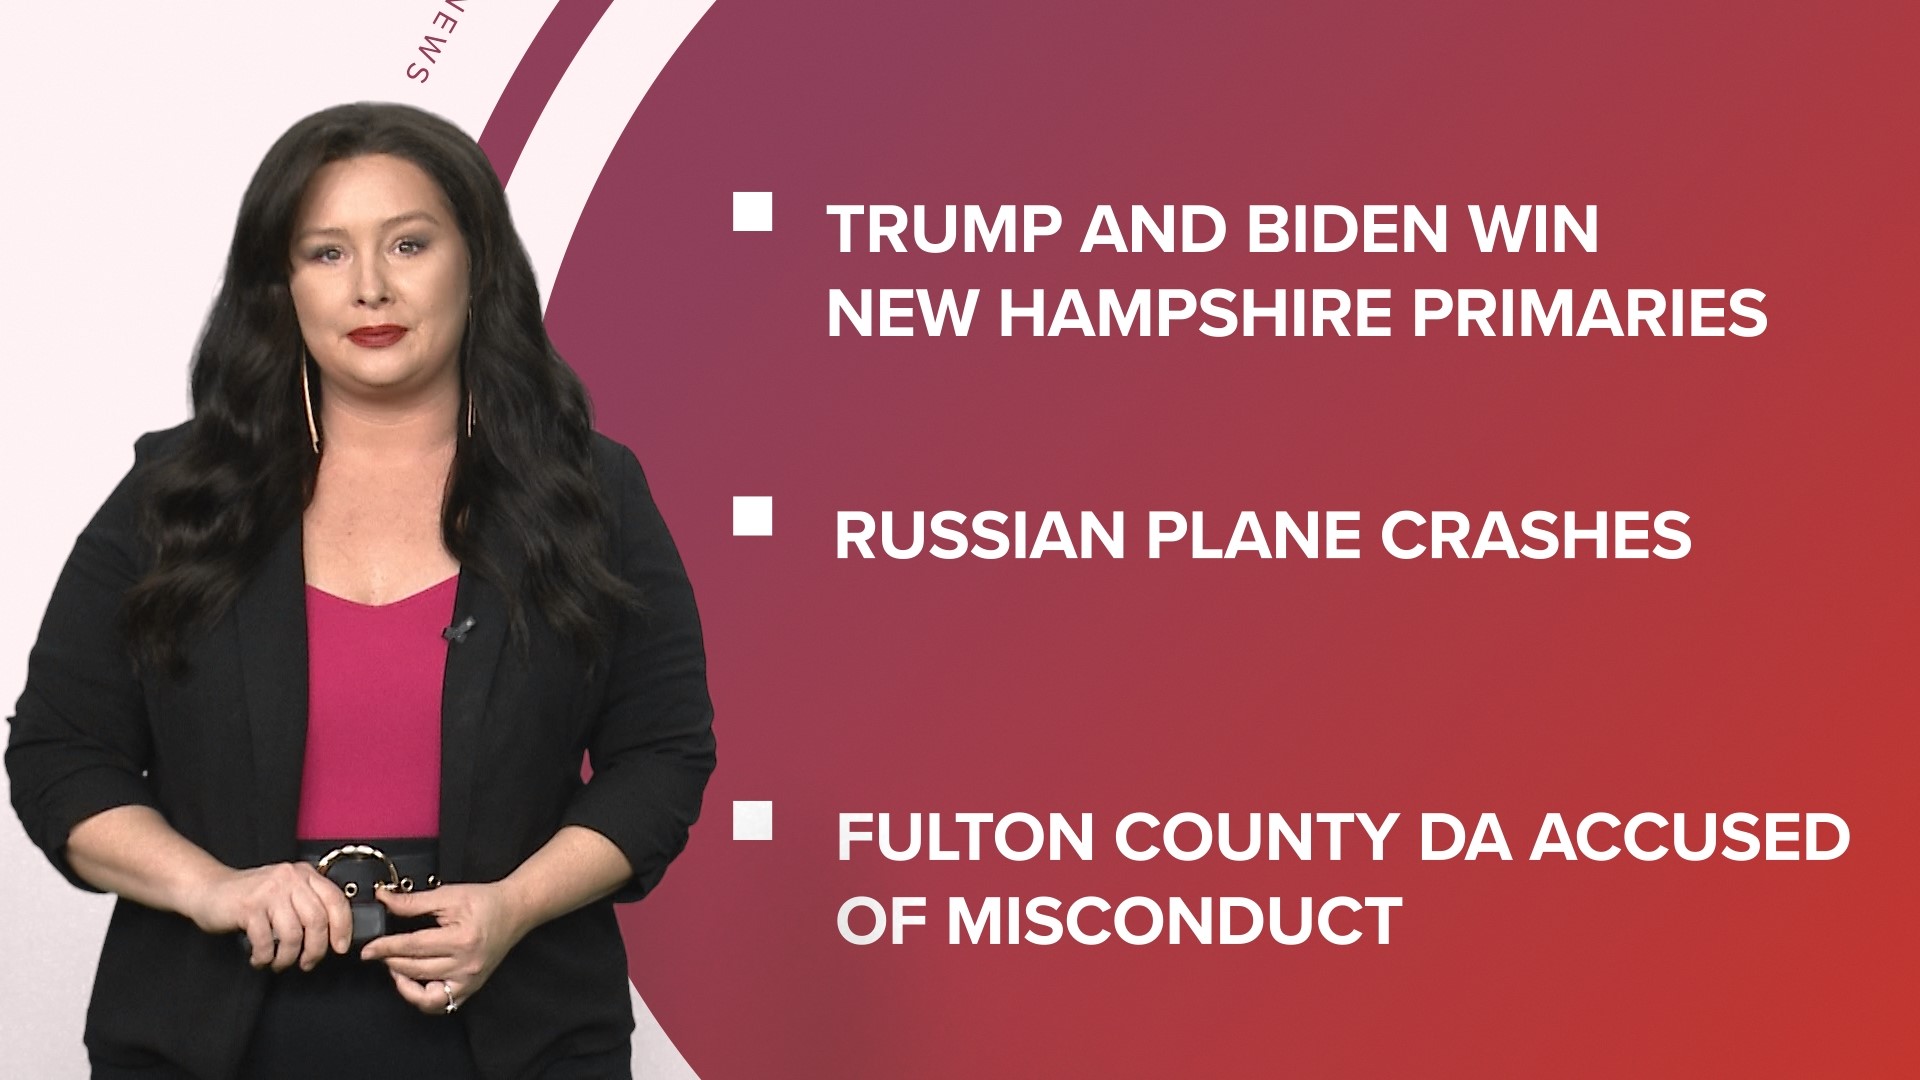 A look at what is happening in the news from Trump and President Biden winning the New Hampshire primaries to the Oscar nominations announced and more.